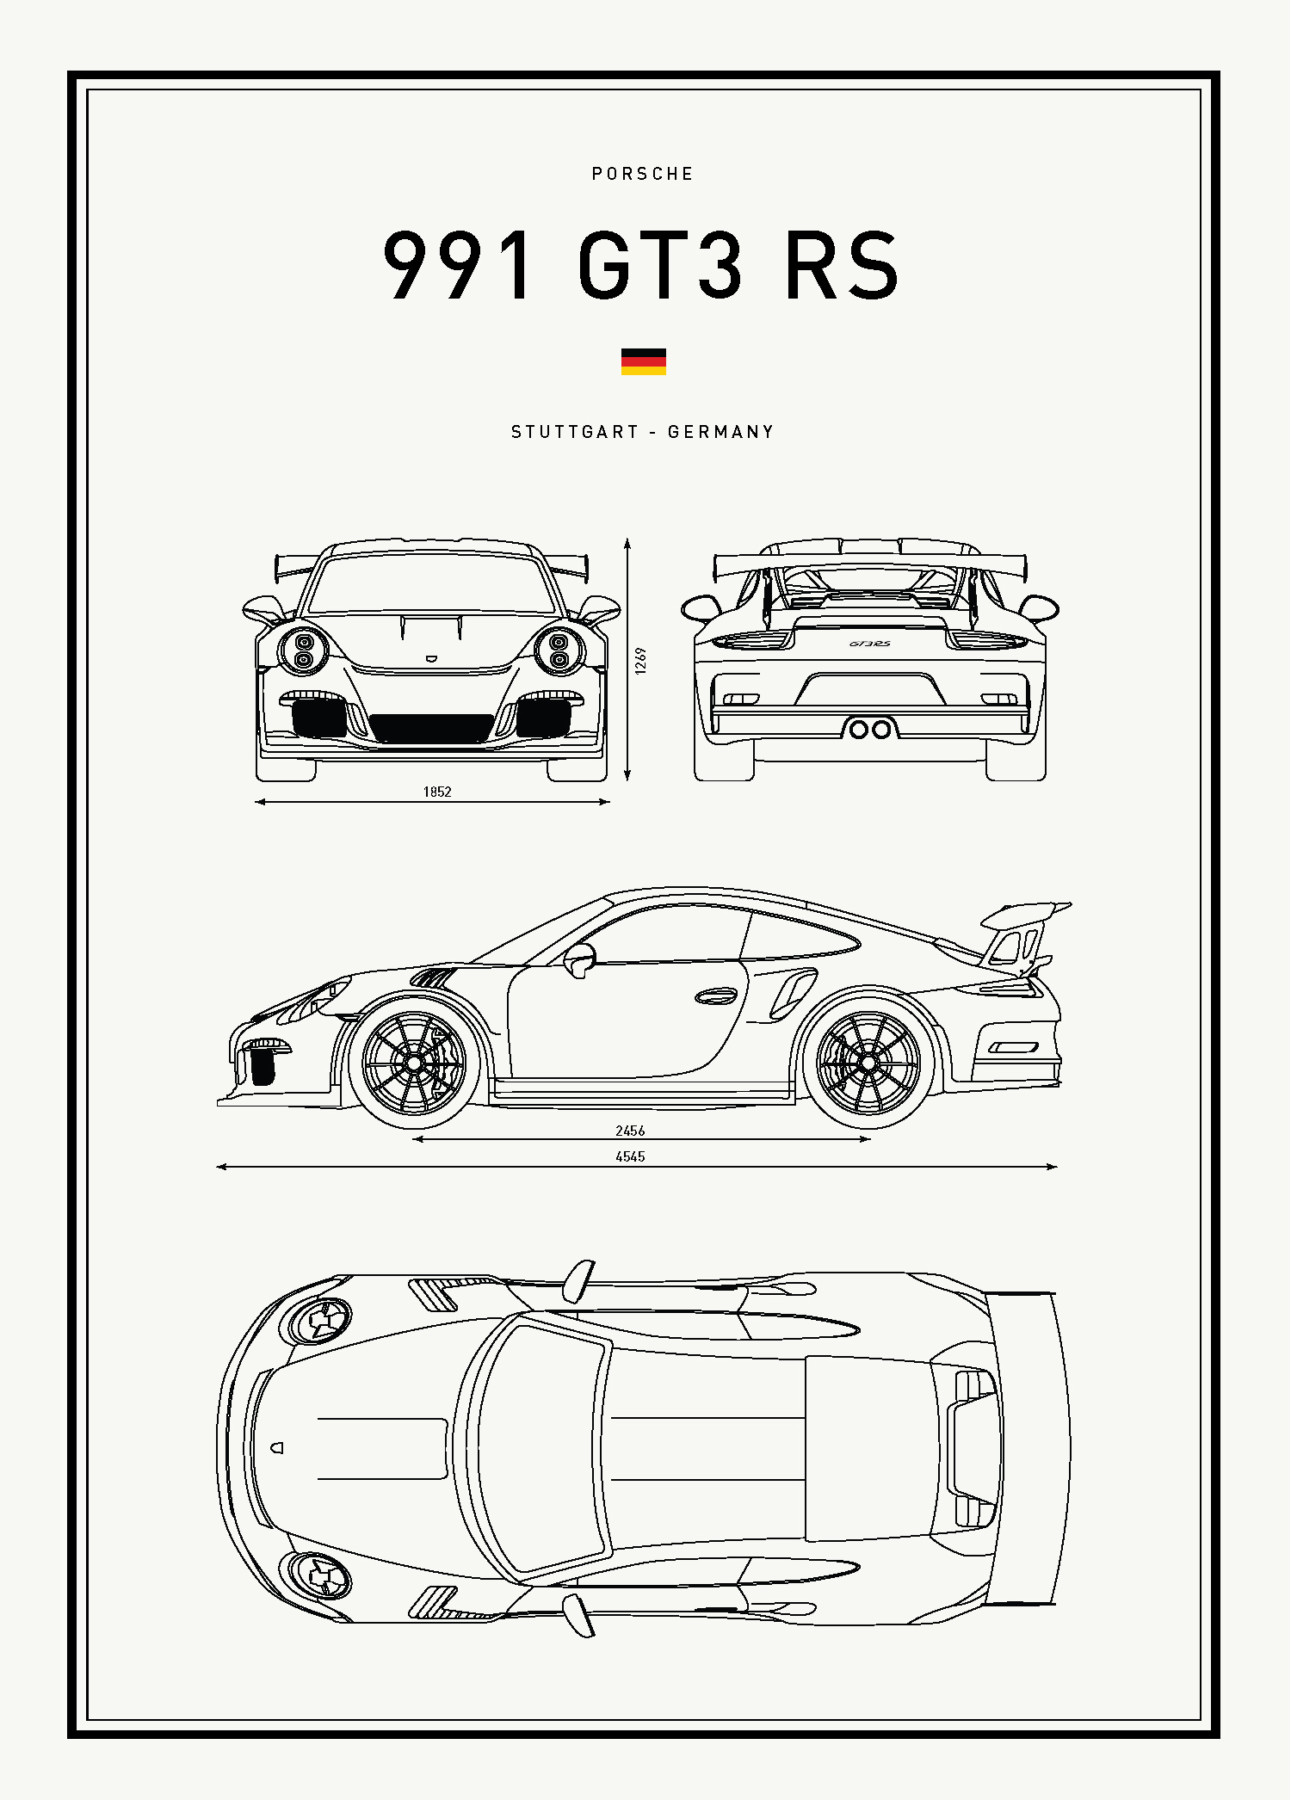 P-991GT3RS